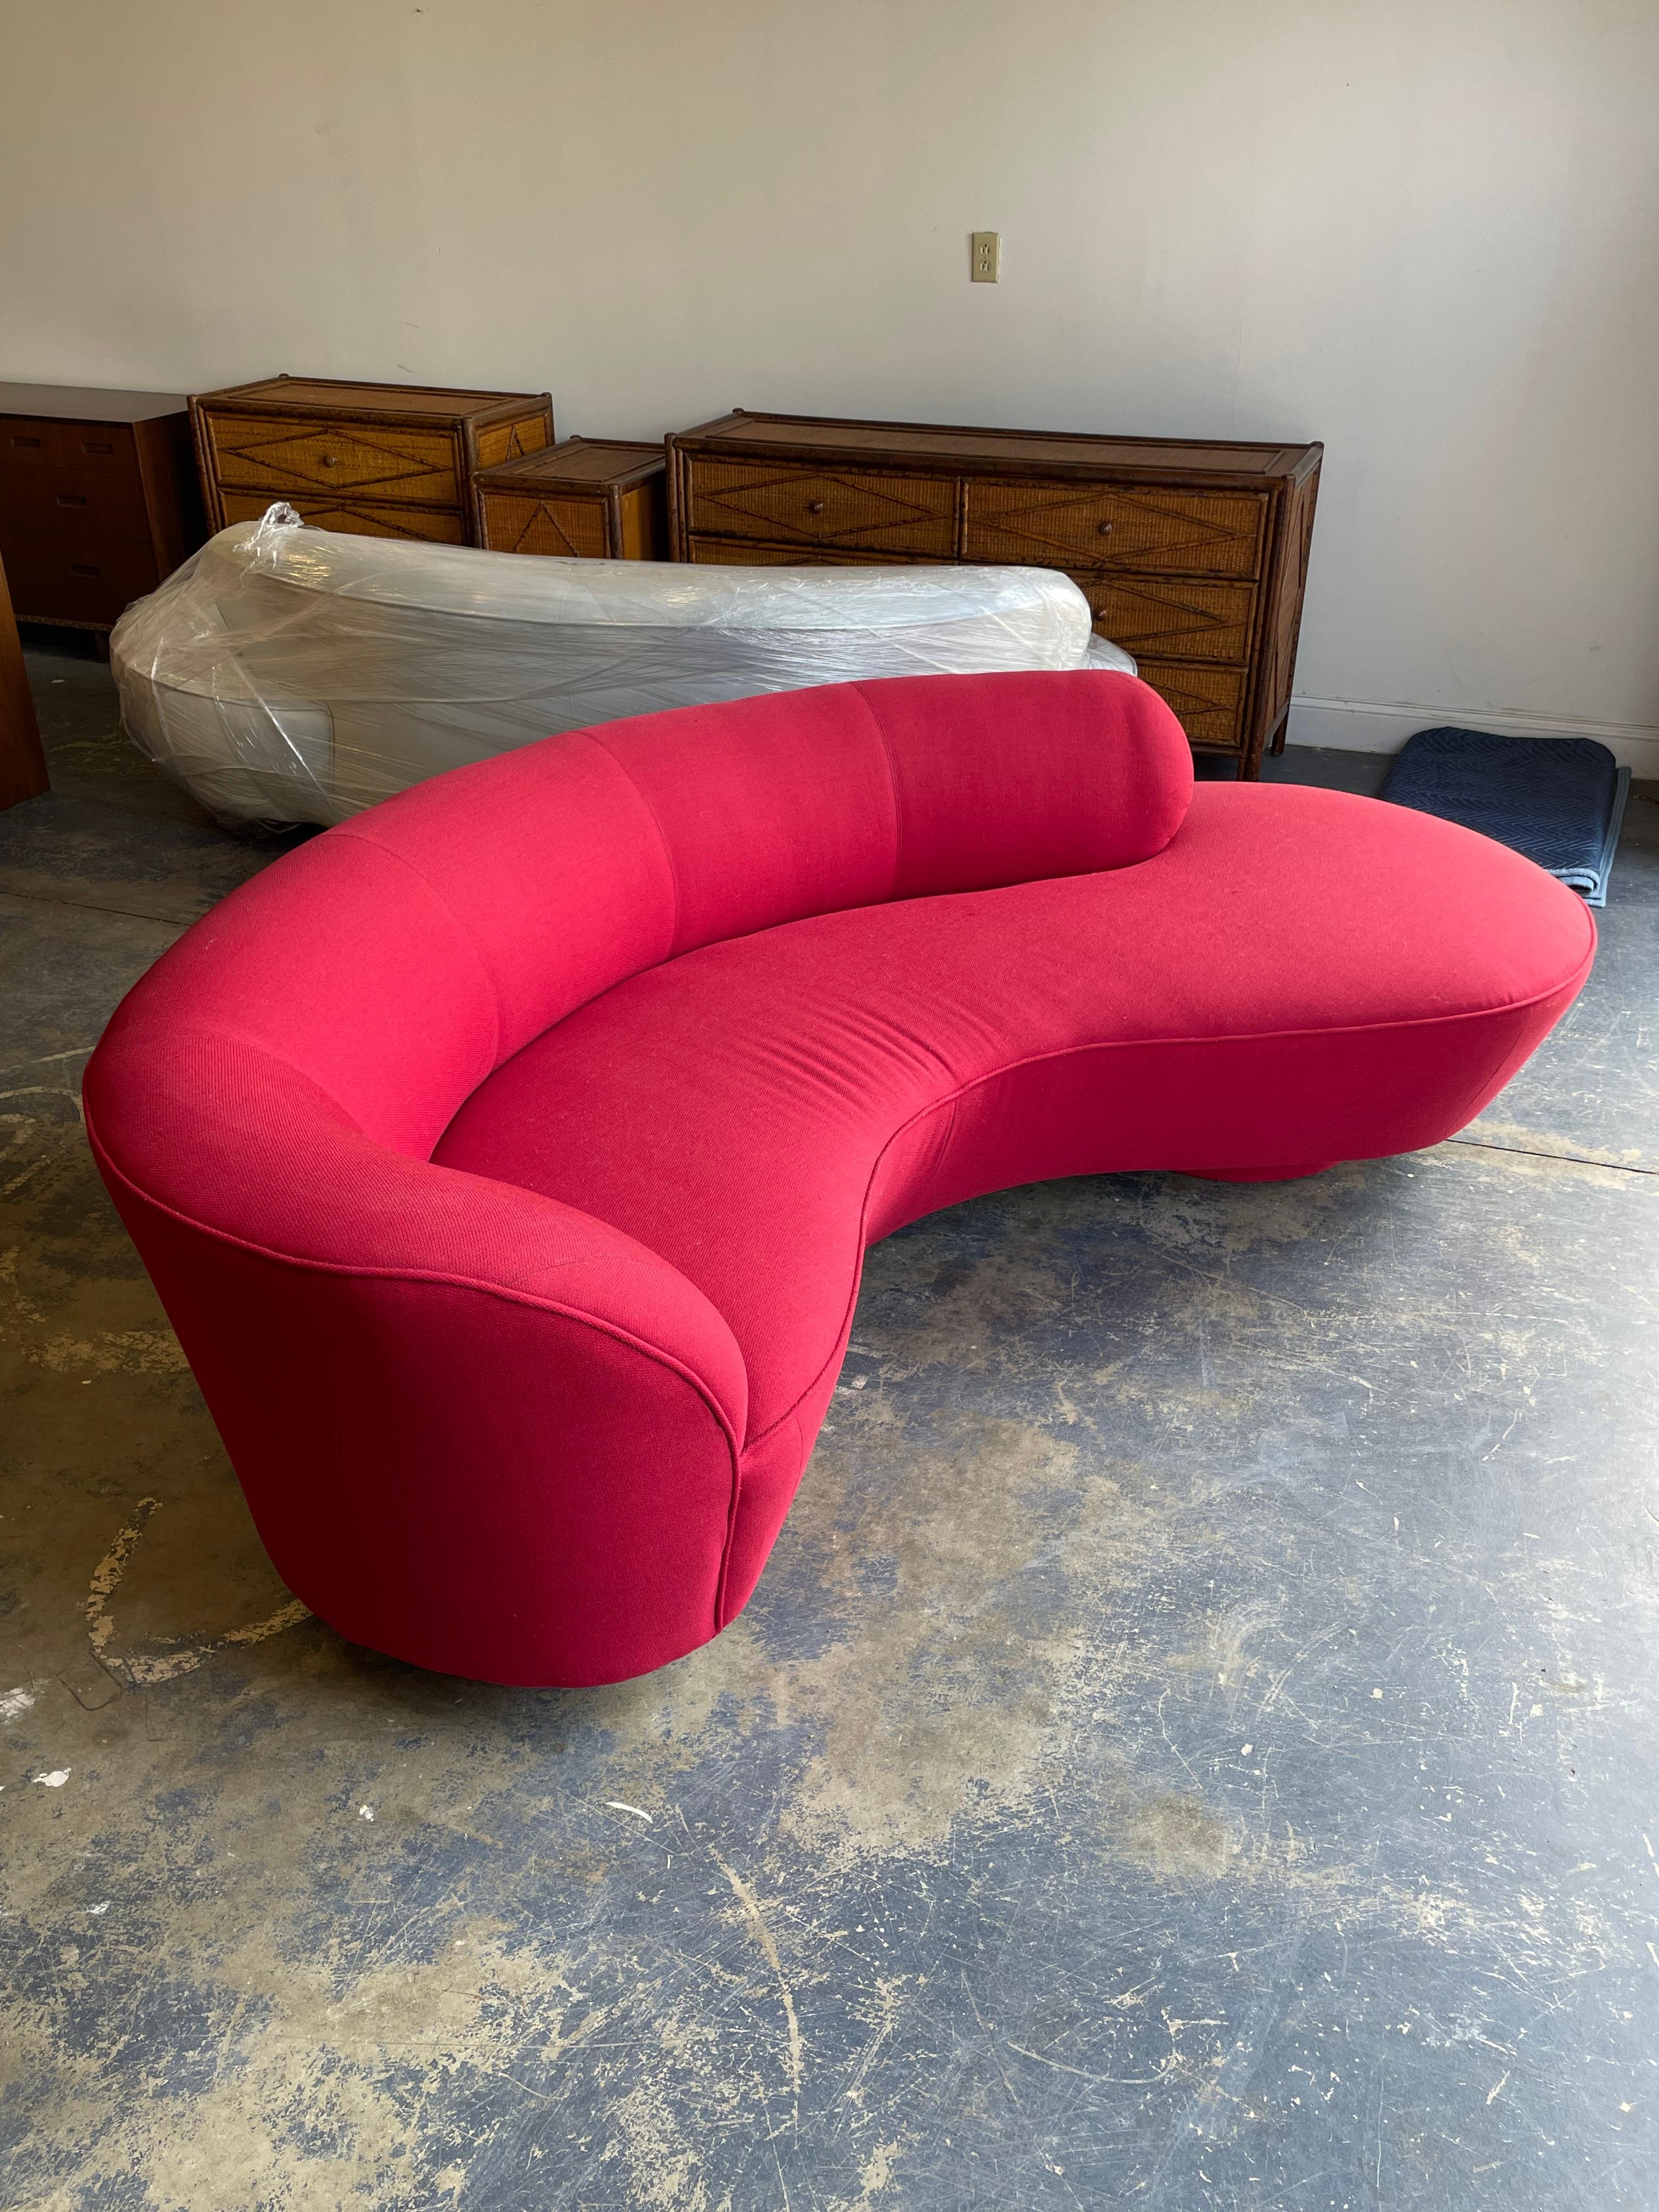 Iconic Vladimir Kagan Cloud or Serpentine sofa in original polyester blend fabric with lucite support. Organic shape blends well with a variety of interiors. Strong vibrant color.